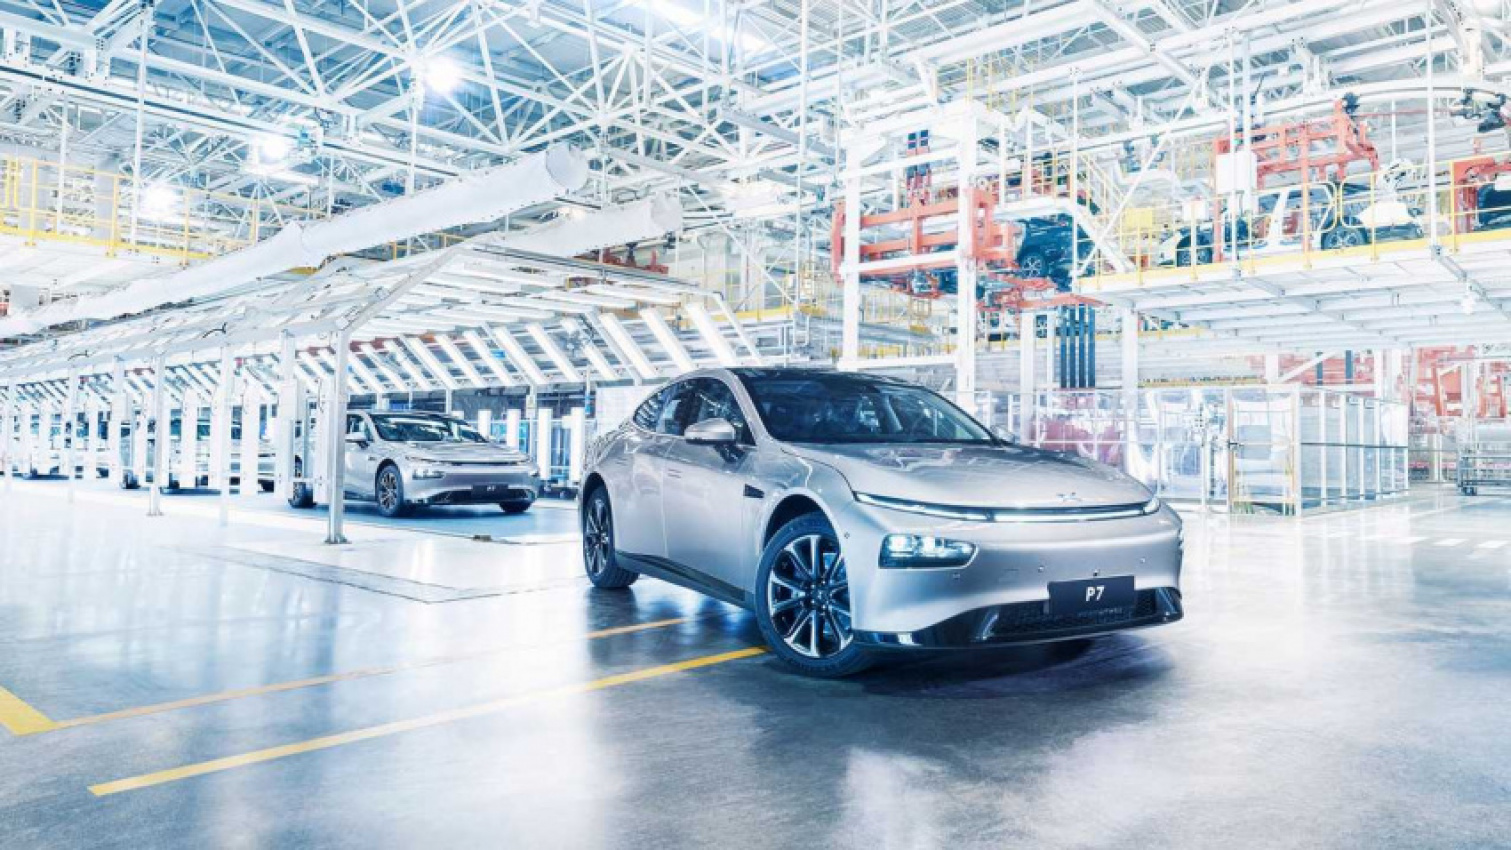 autos, cars, evs, xpeng, xpeng ev sales almost tripled in february 2022